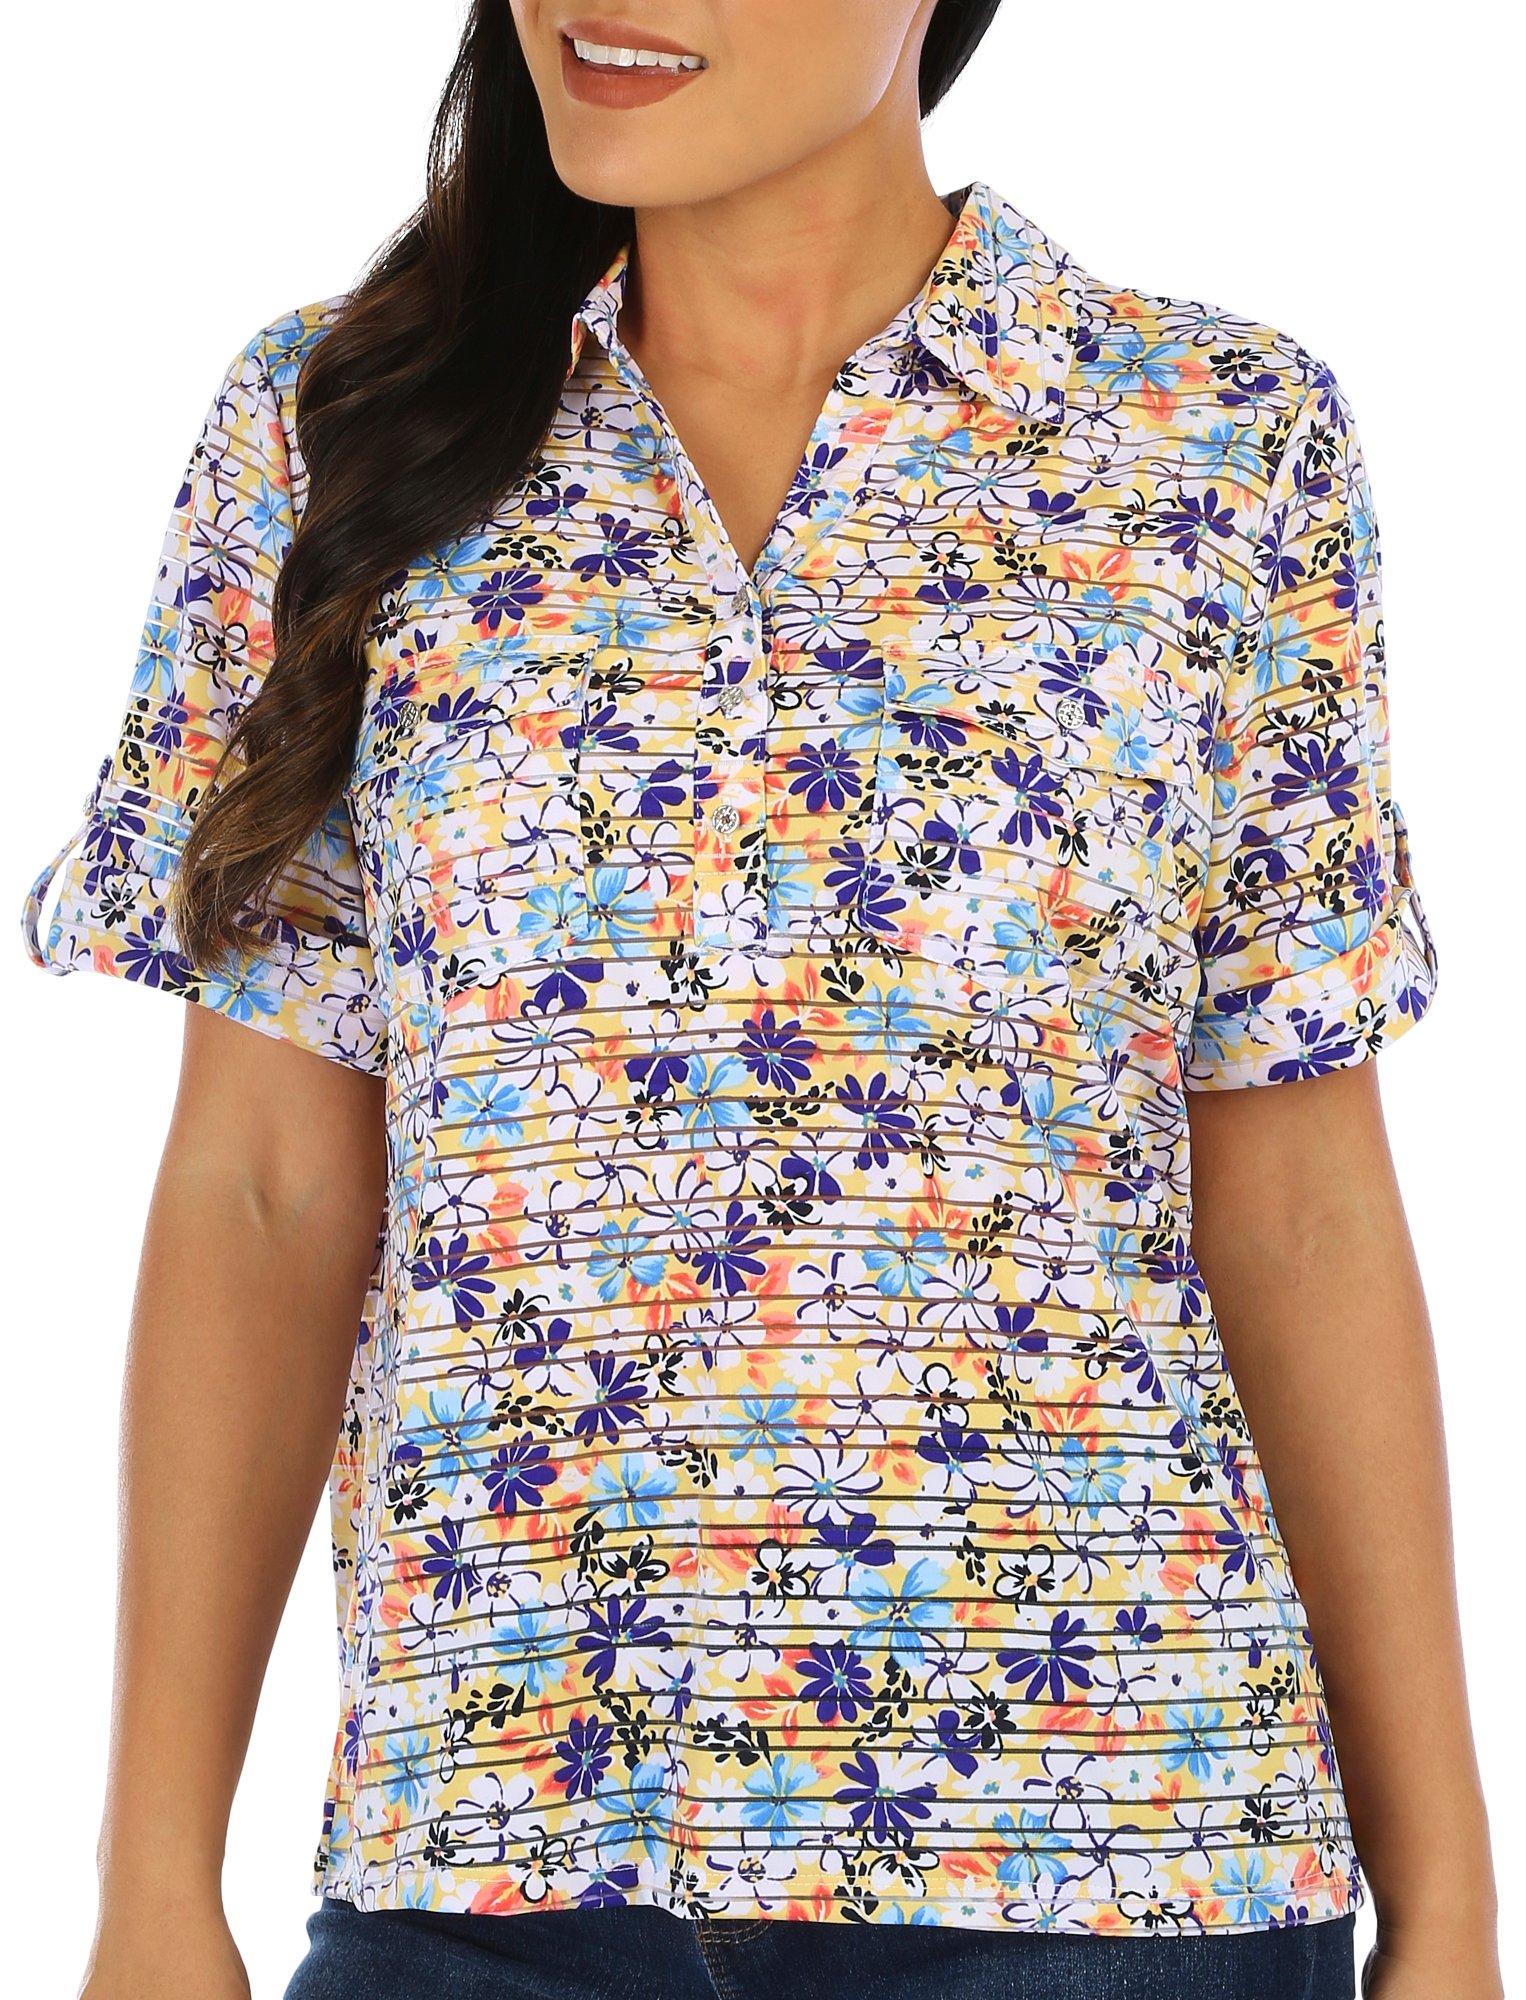 Coral Bay Petite Floral Print Short Sleeve Polo